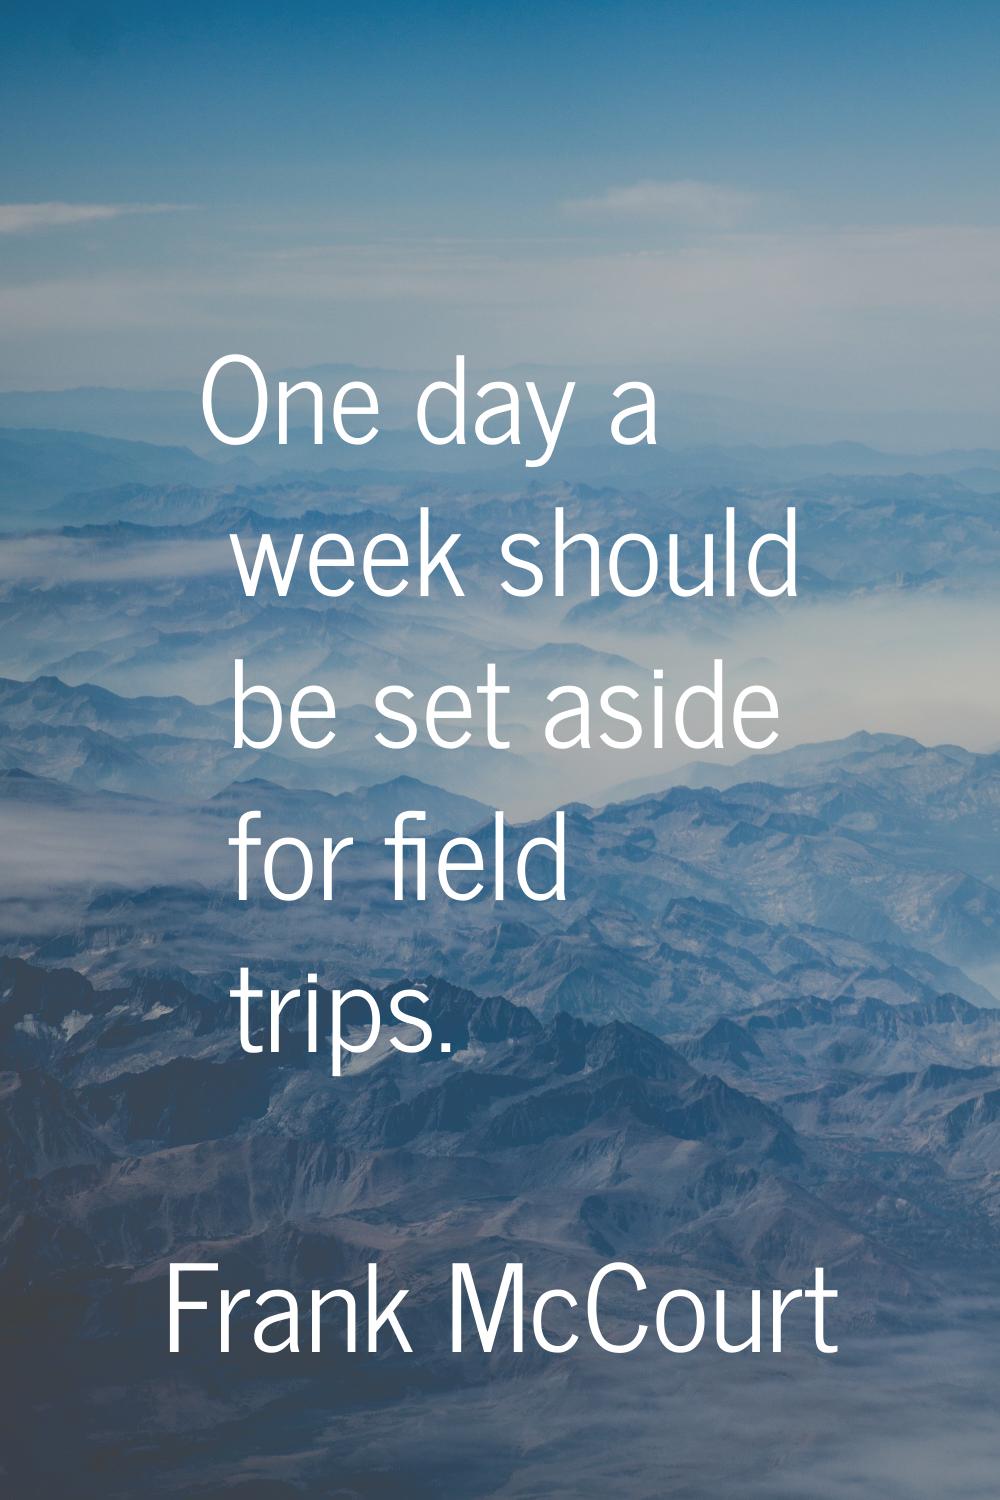 One day a week should be set aside for field trips.